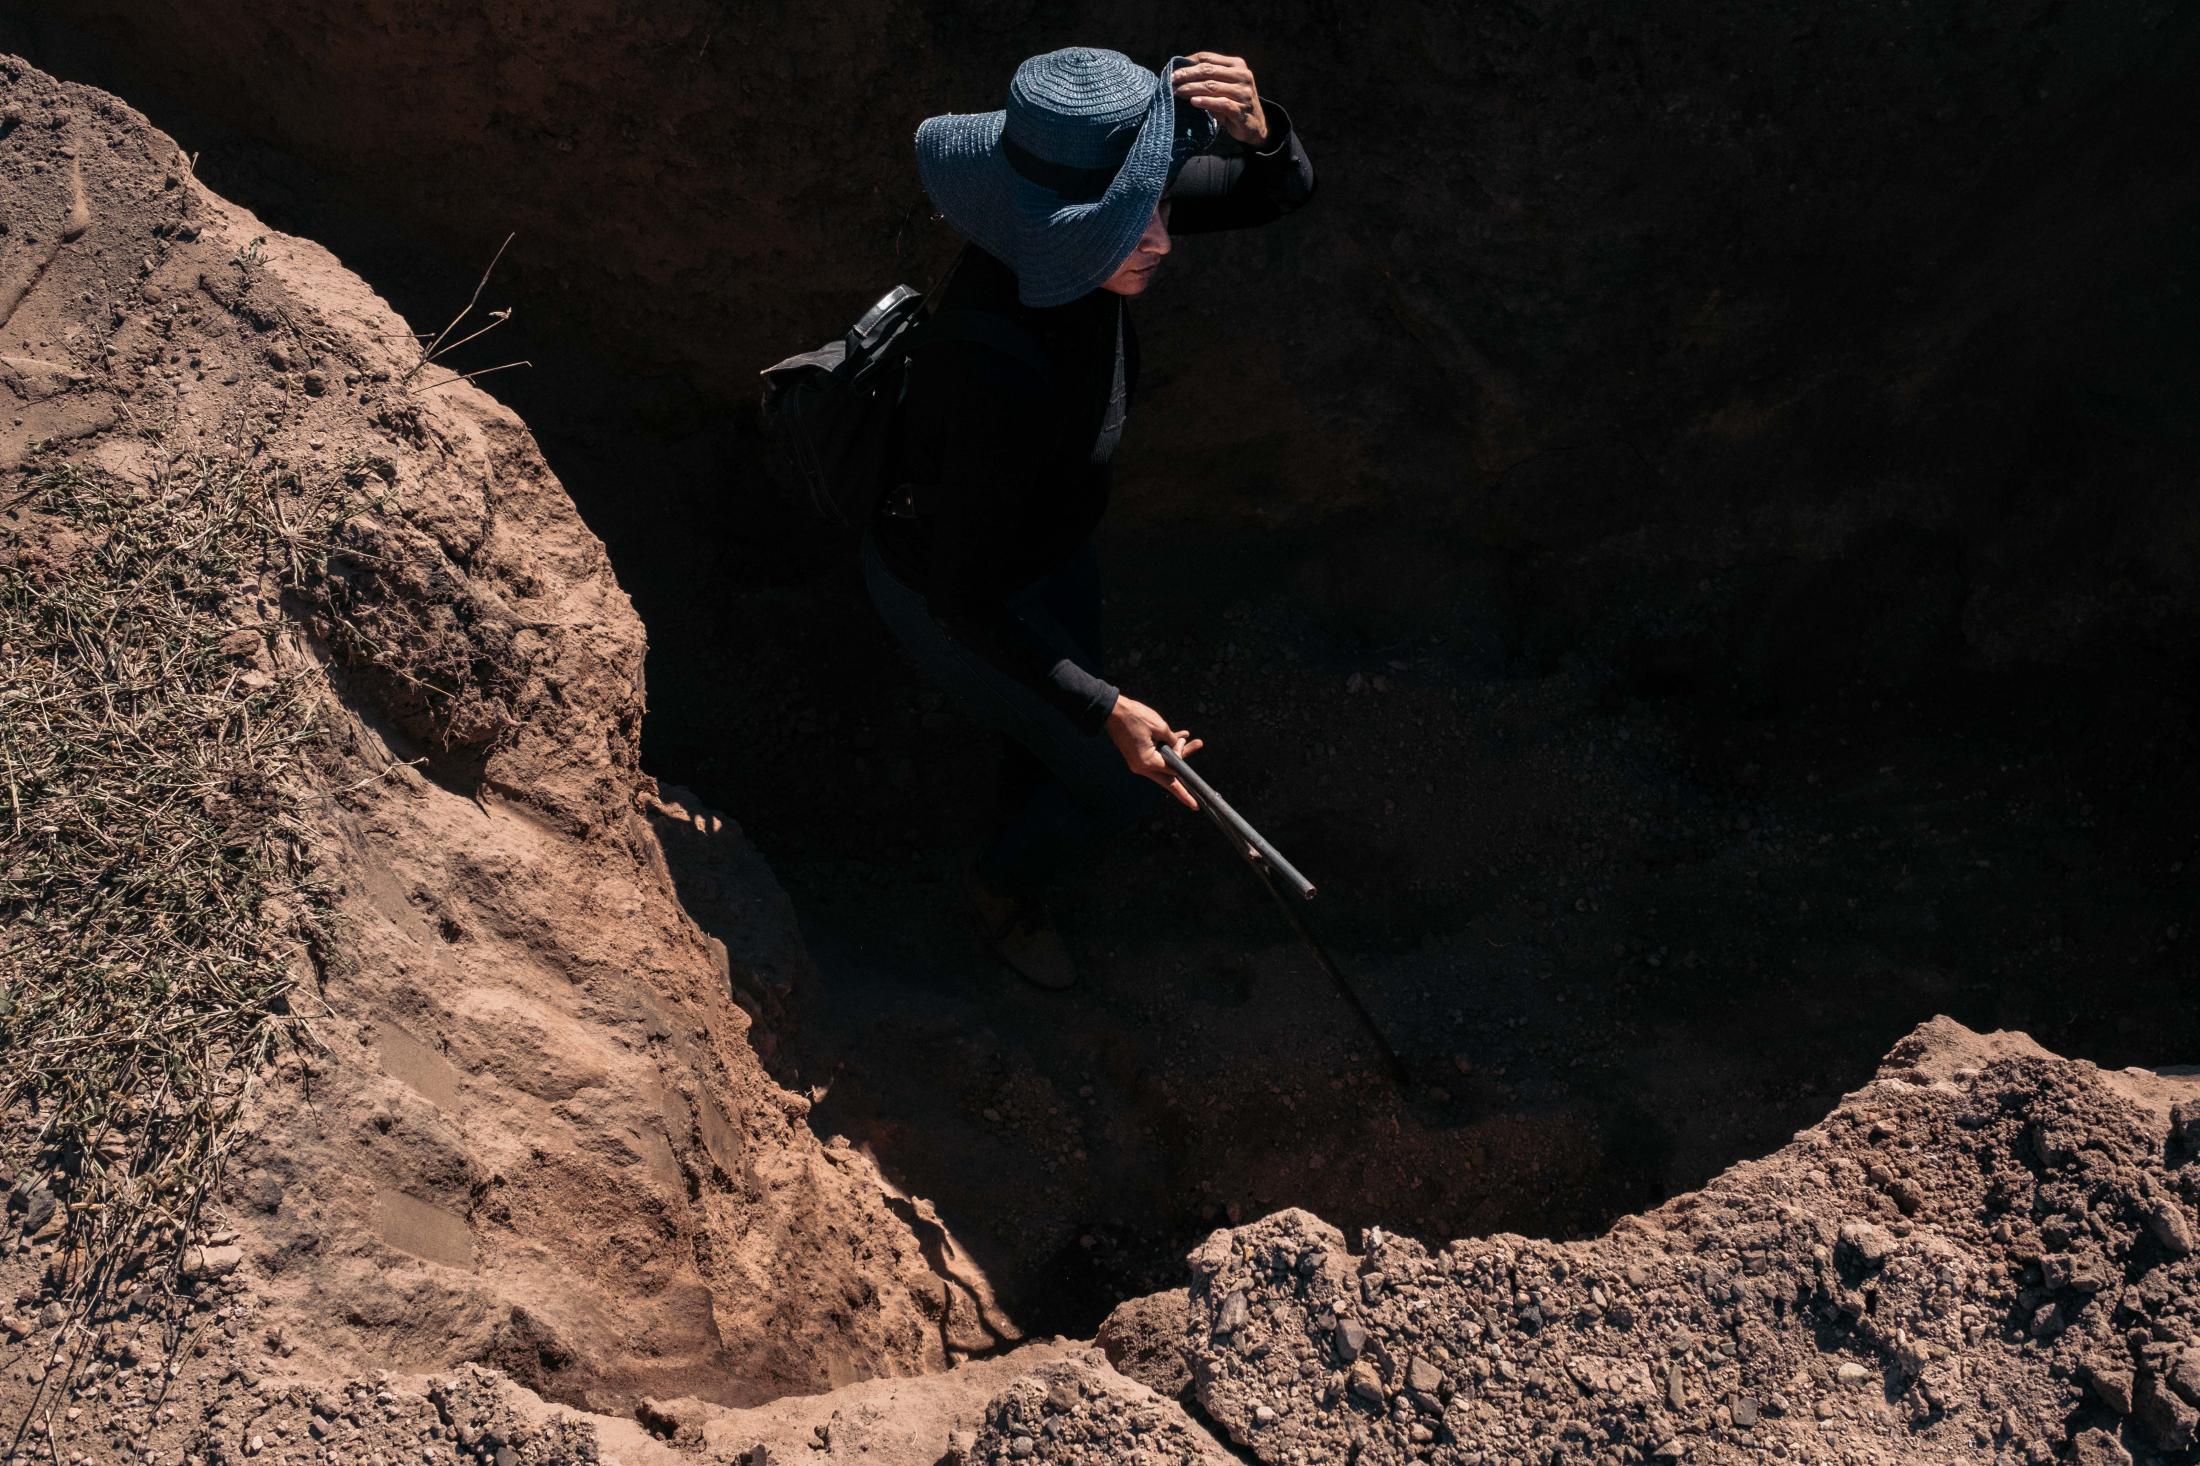  Cecilia searches for the body of her missing son by digging a hole in the ground with a backhoe rented for the day. Poking the earth allows one to...